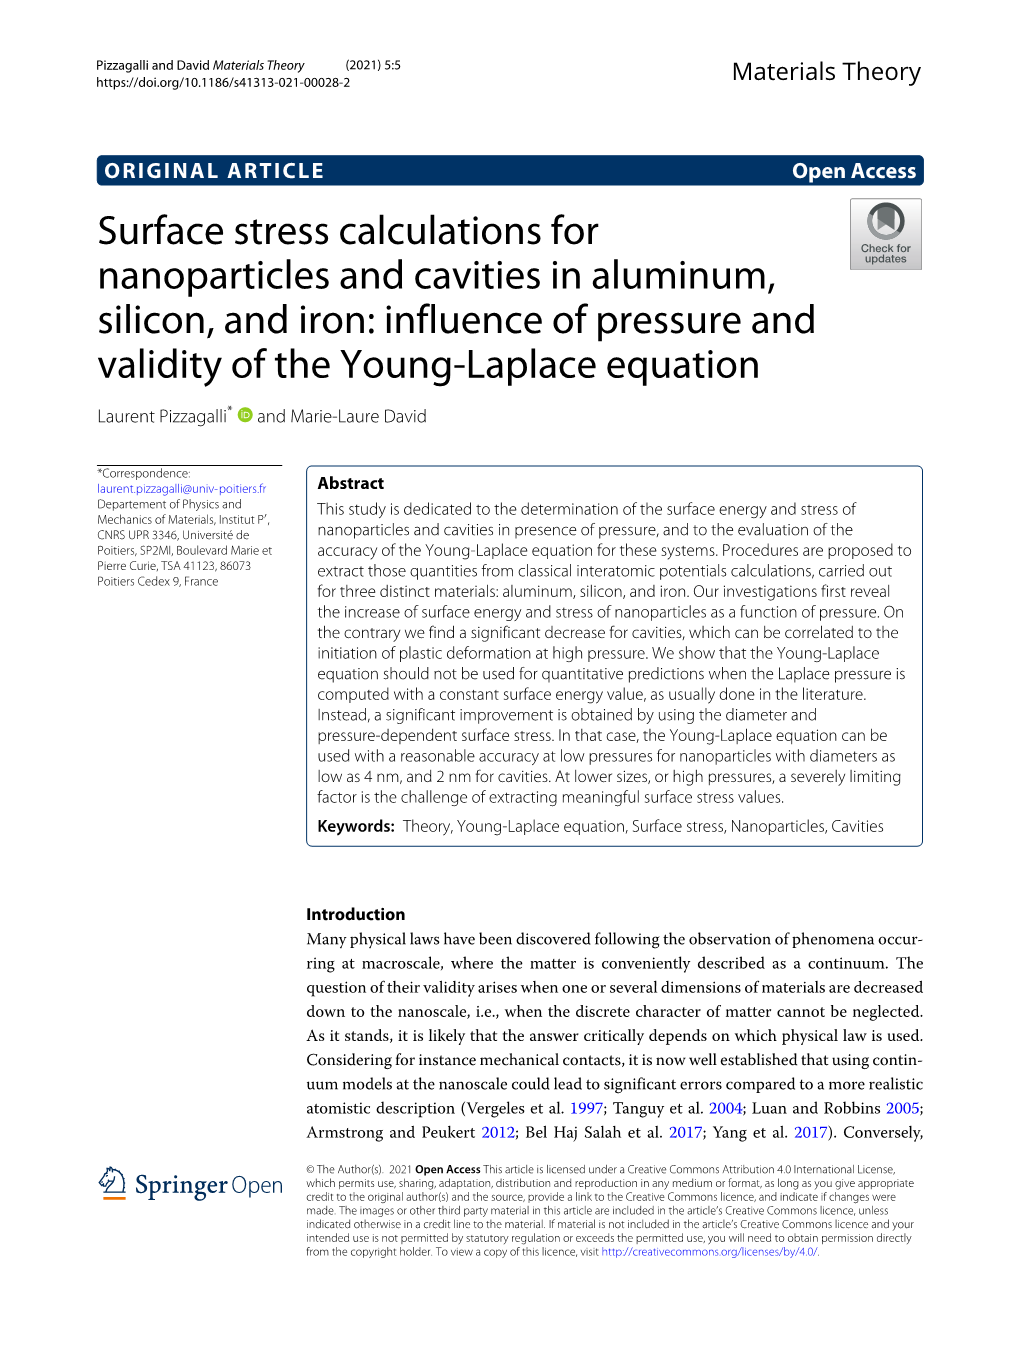 Surface Stress Calculations for Nanoparticles and Cavities in Aluminum, Silicon, and Iron: Influence of Pressure and Validity of the Young-Laplace Equation